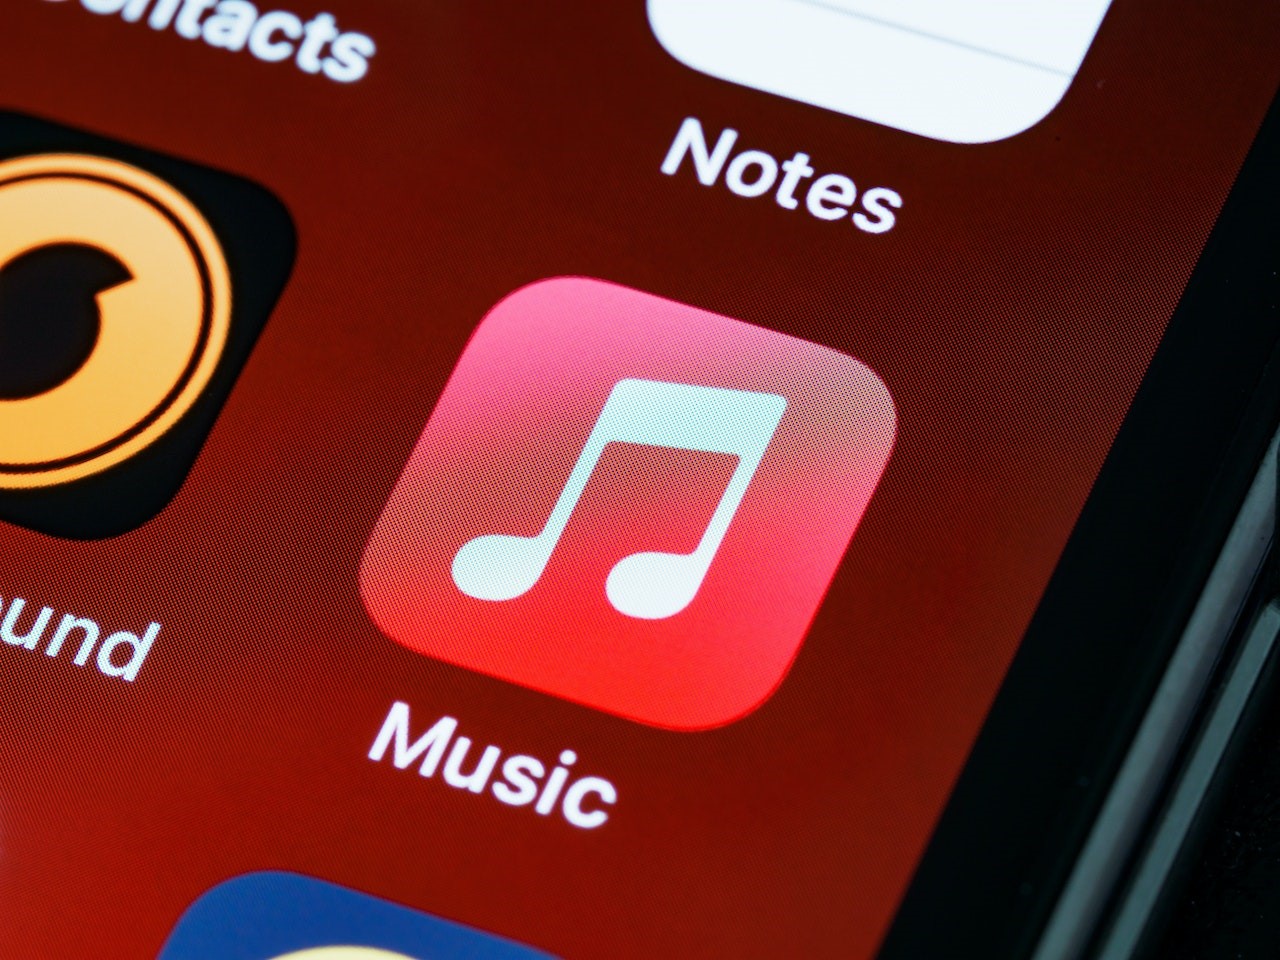 Top 7 iTunes Tips and Tricks You Need to Know for Amazing Deals on a $50 iTunes Gift Card